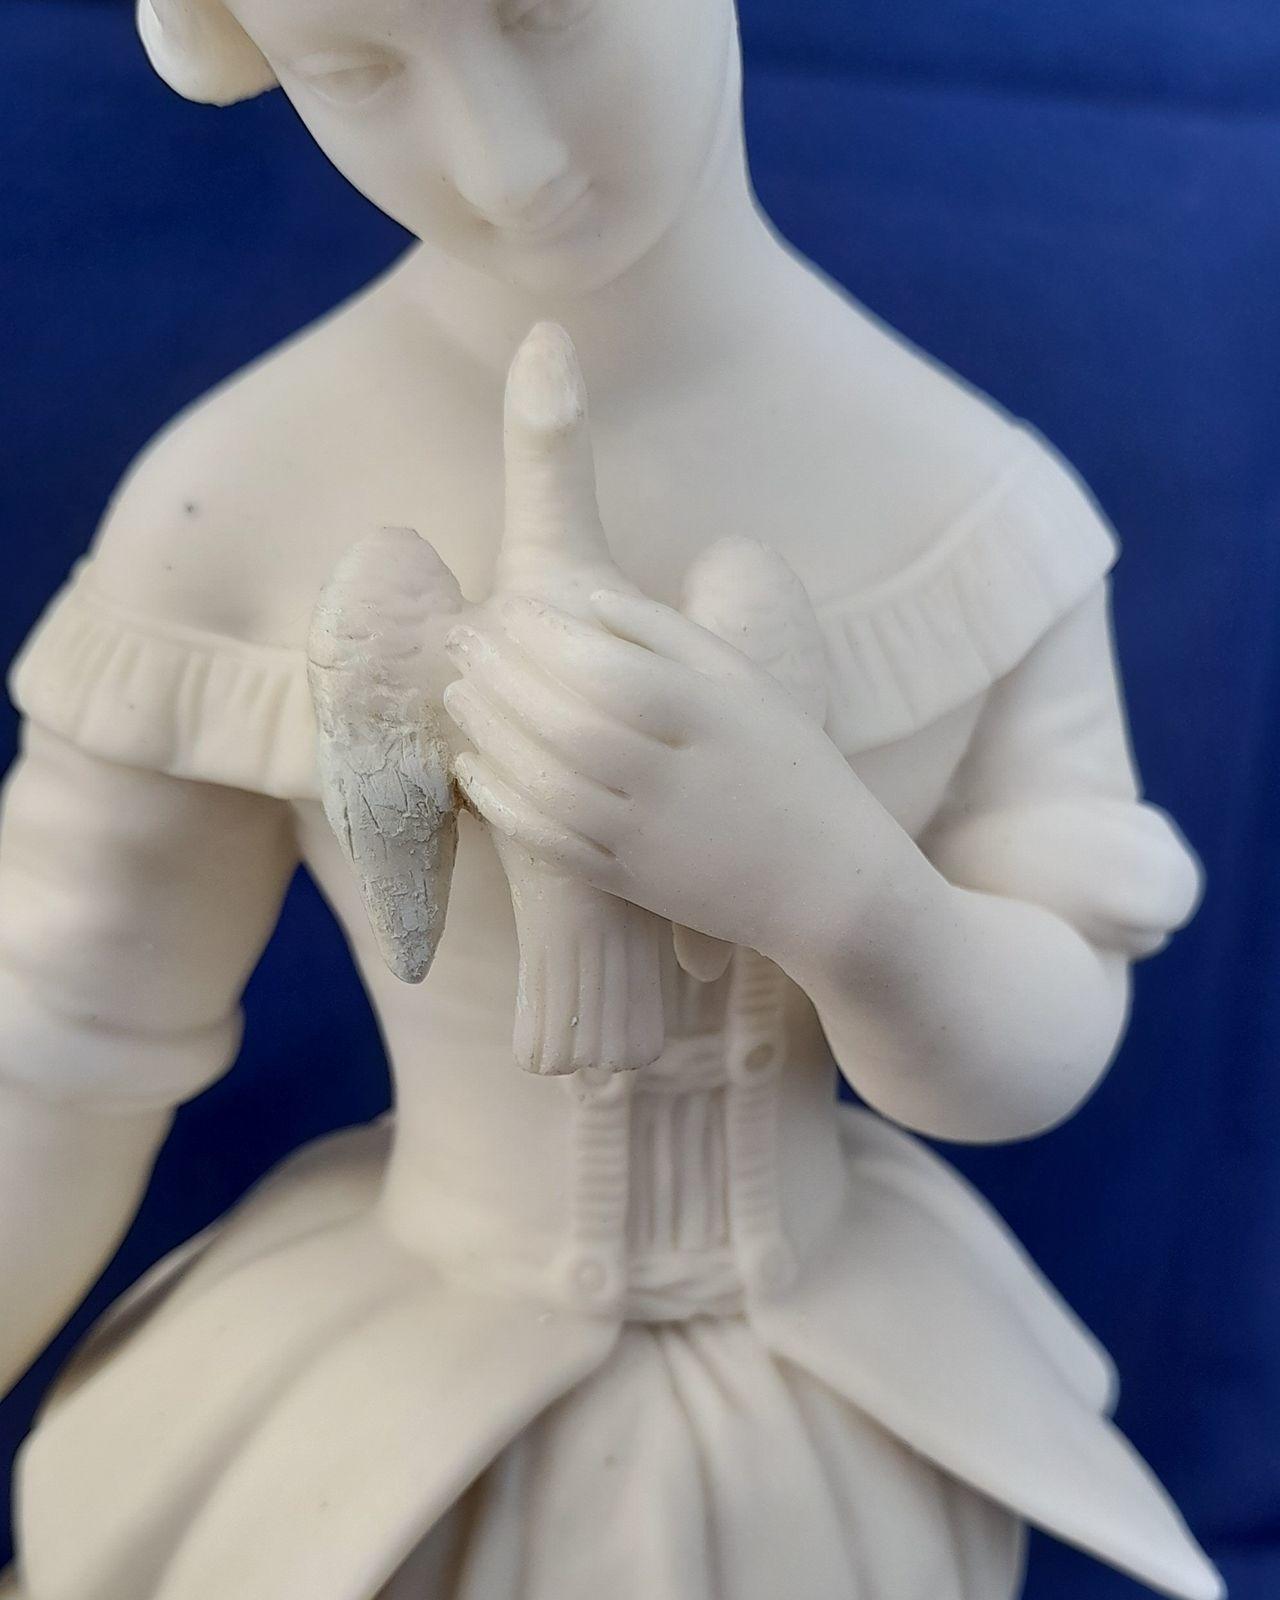 An antique Minton white Parian porcelain figurine of a young woman holding a bird symbolic of kindness and innocence circa 1845 29.5 cm high 1 kg in weight some collectors may refer to this as biscuit or bisque porcelain.